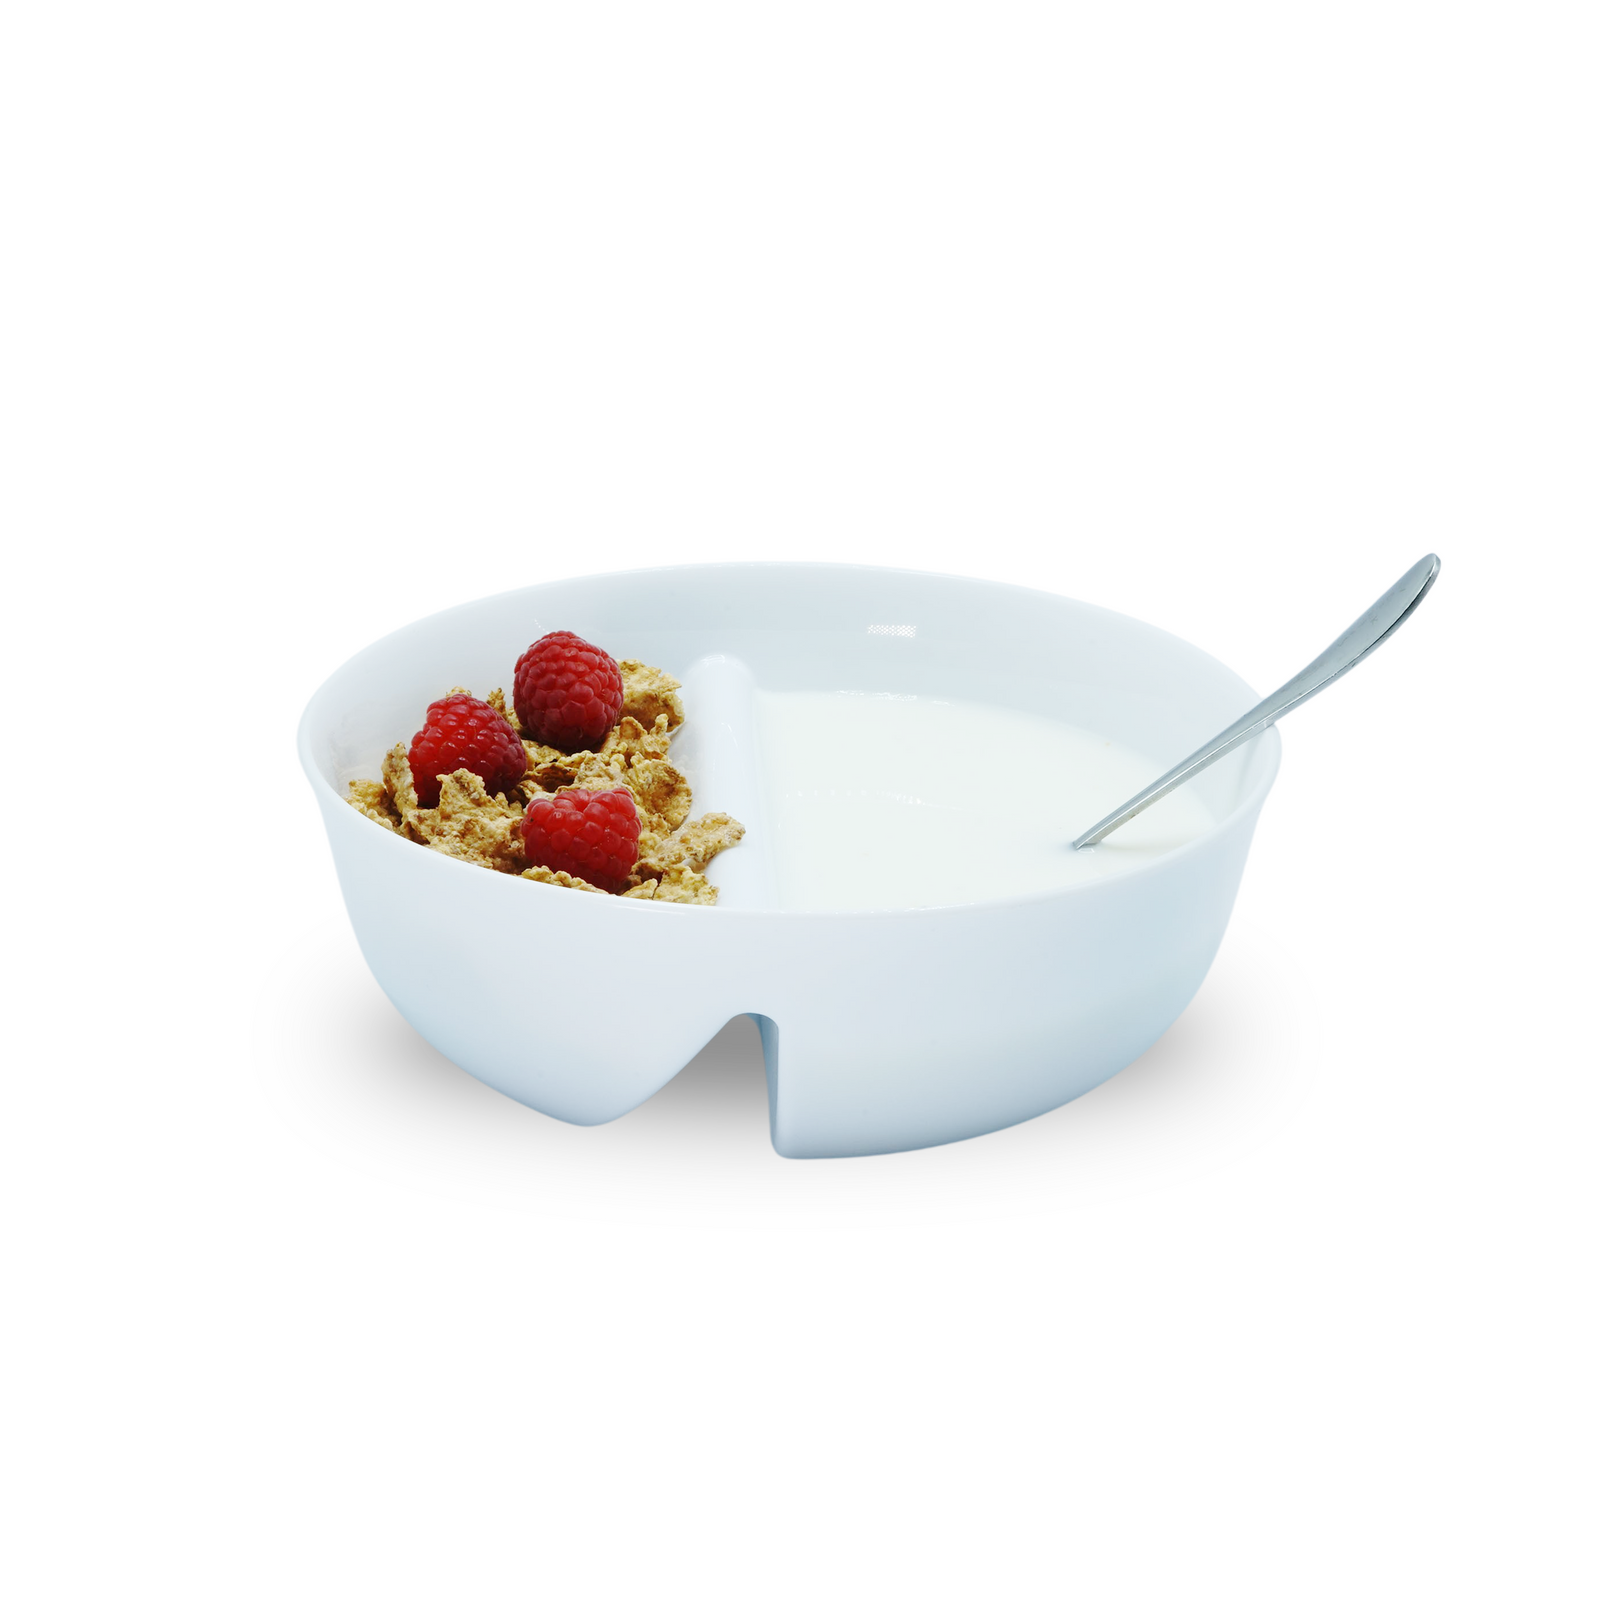 Cereal to Go Cup 29oz Portable Travel Cereal Bowl and Milk